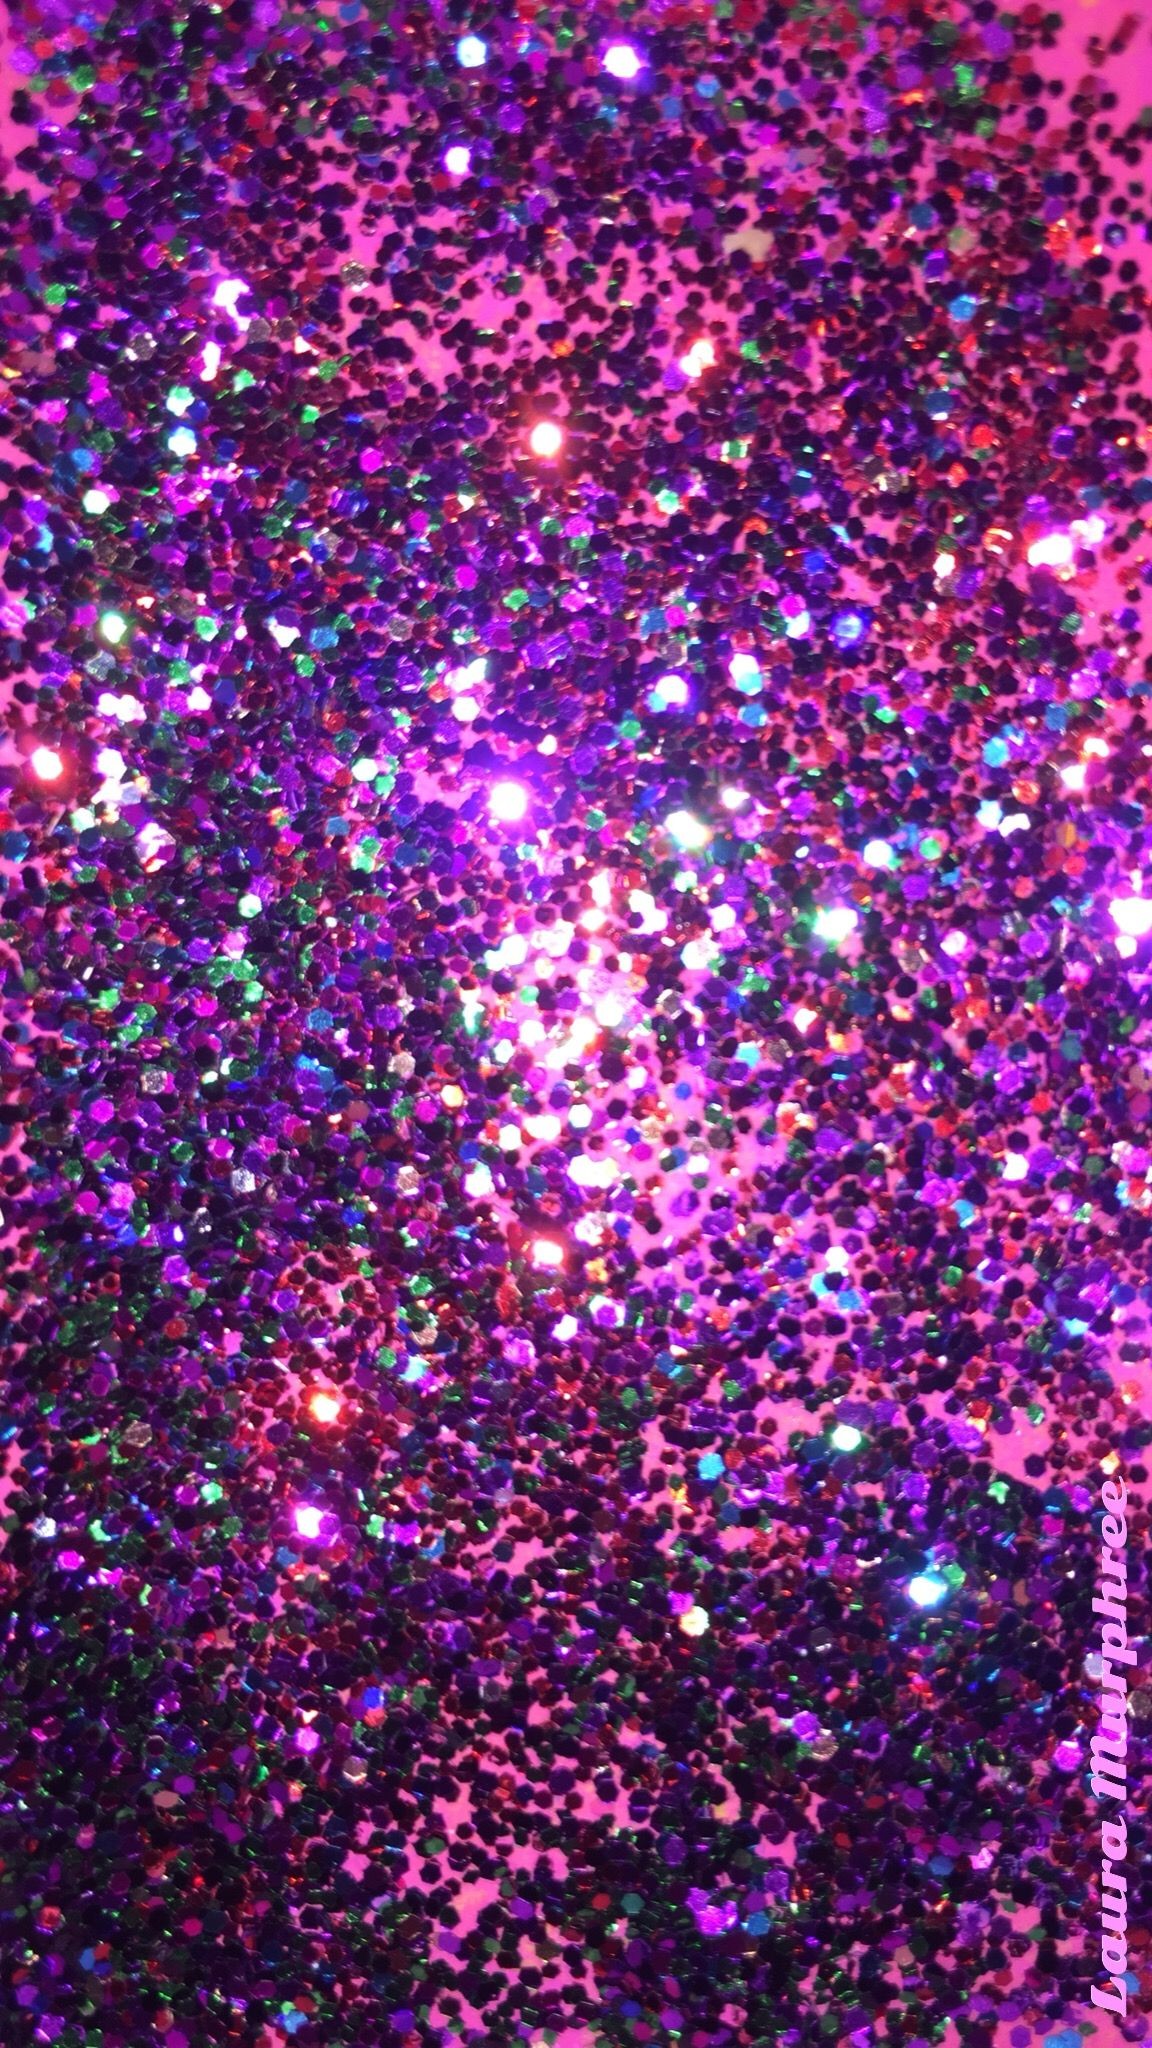 Sparkly Backgrounds (70+ images)